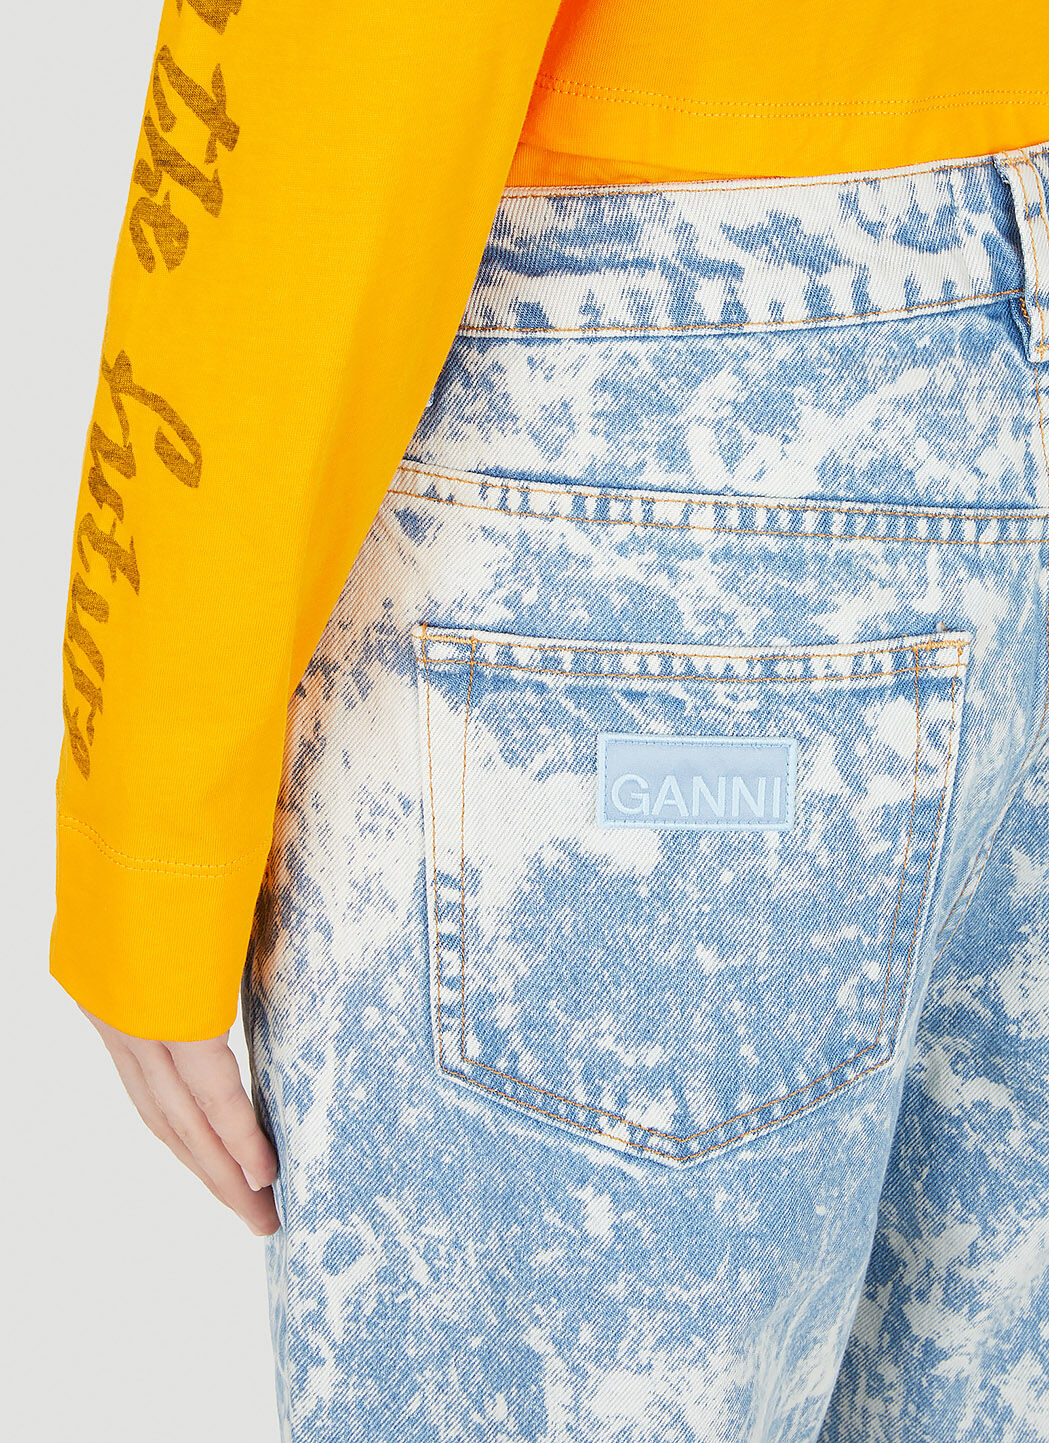 Comeback Of Bleached Jean Trend For SS 19 - Denimandjeans | Global Trends,  News and Reports | Worldwide